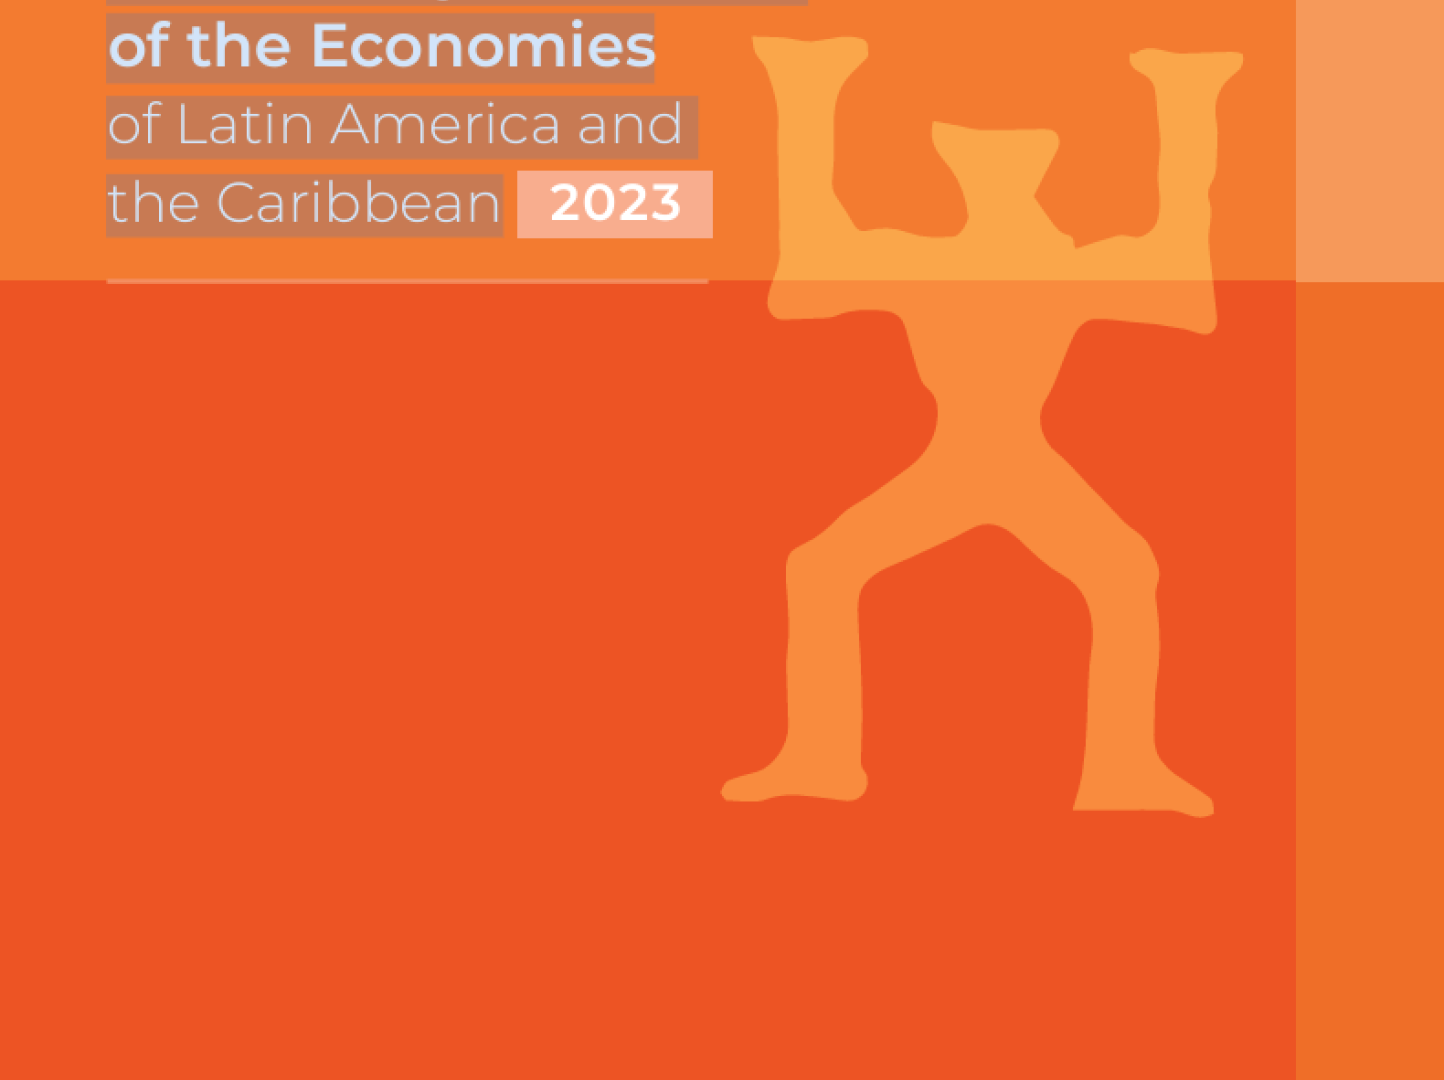 The cover for a report by ECLAC